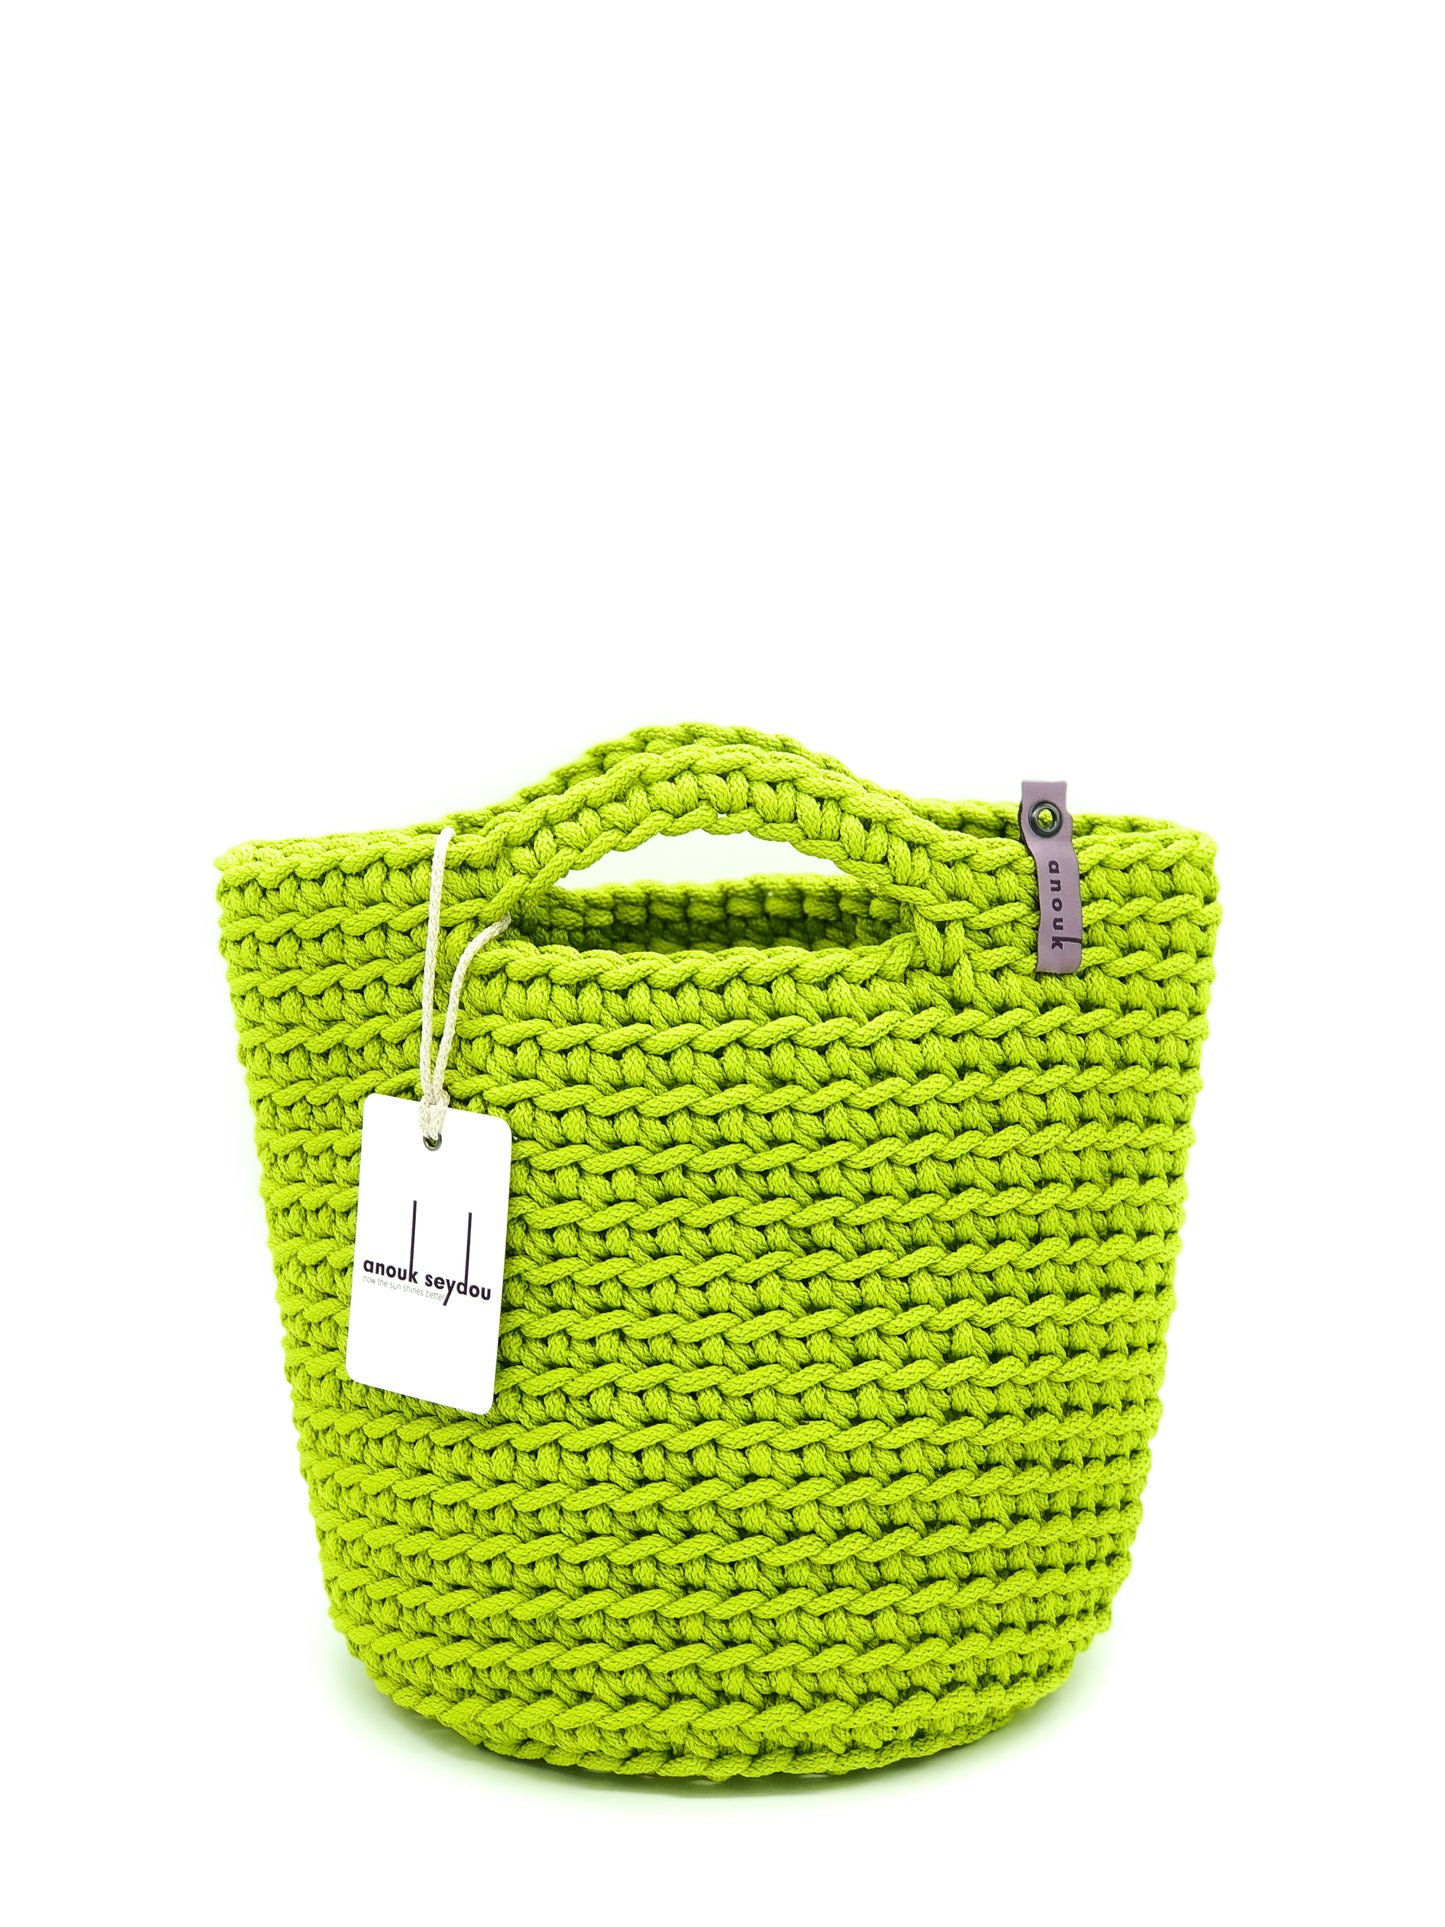 Scandinavian Style Handmade Crochet Tote Bag with Small Handles Spring Green